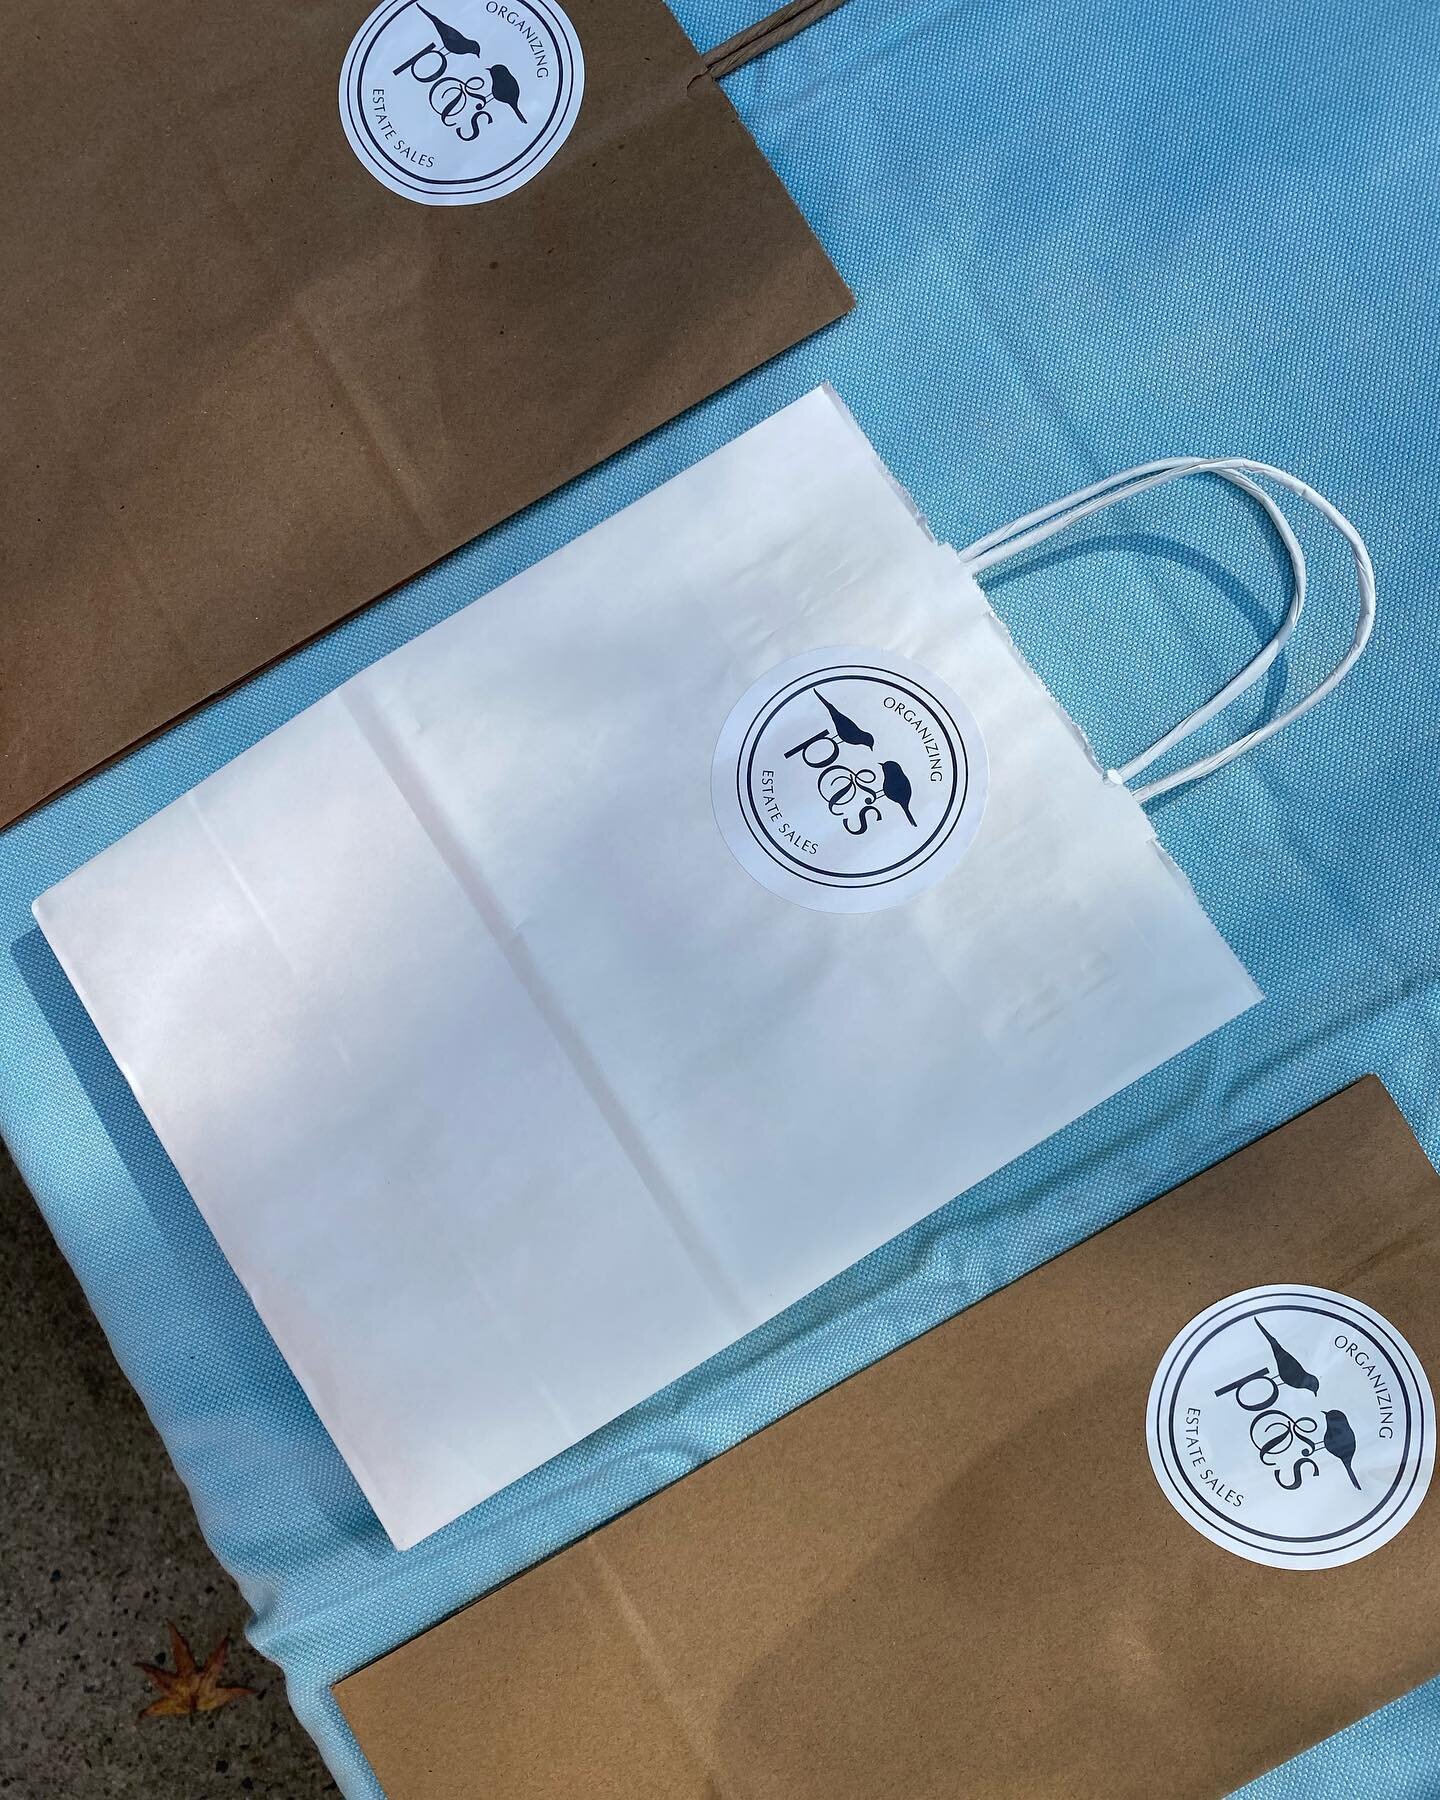 Newest upgrade to our estate sales are these sturdy shopping bags. 

No need to make multiple trips to your car; let us pack up your findings while you shop! 

#doyouhaveabag #pureandsimpleestatesales #estatesalesincharlotte